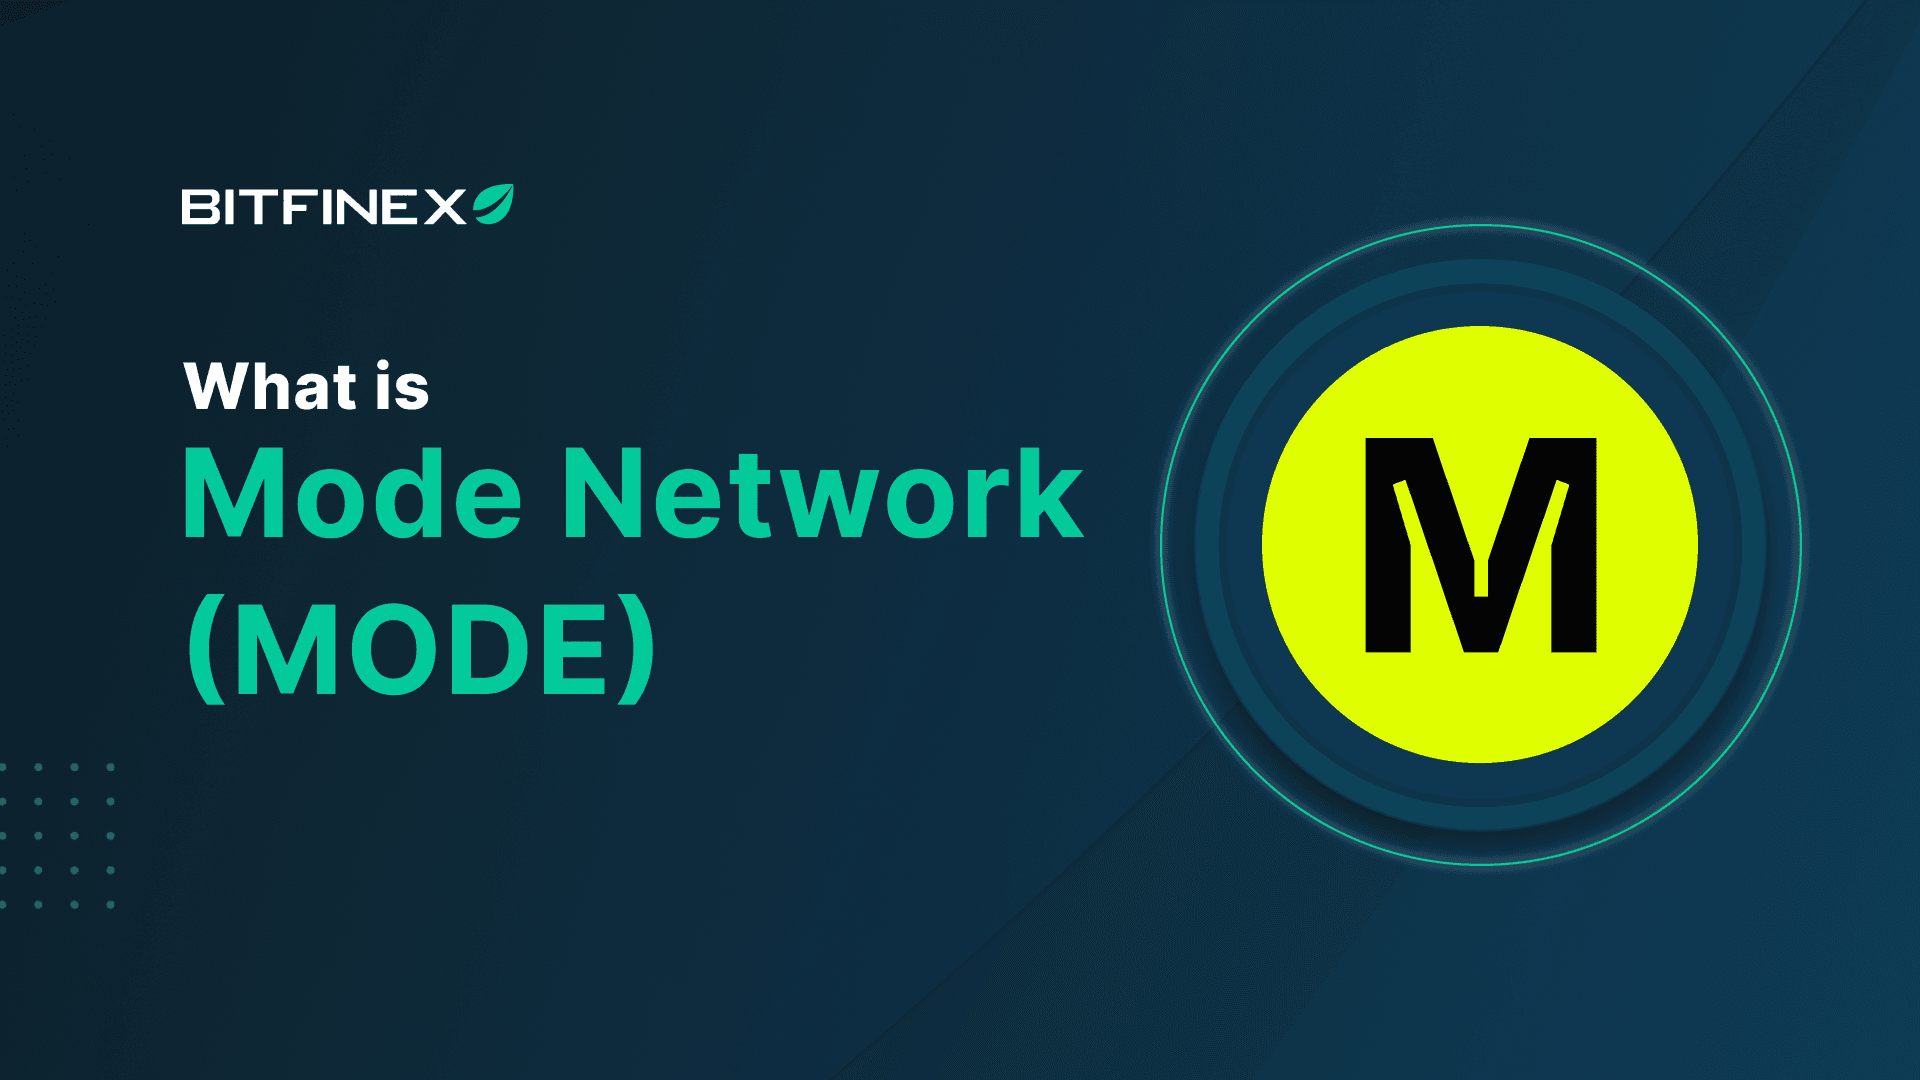 What is Mode (MODE)?